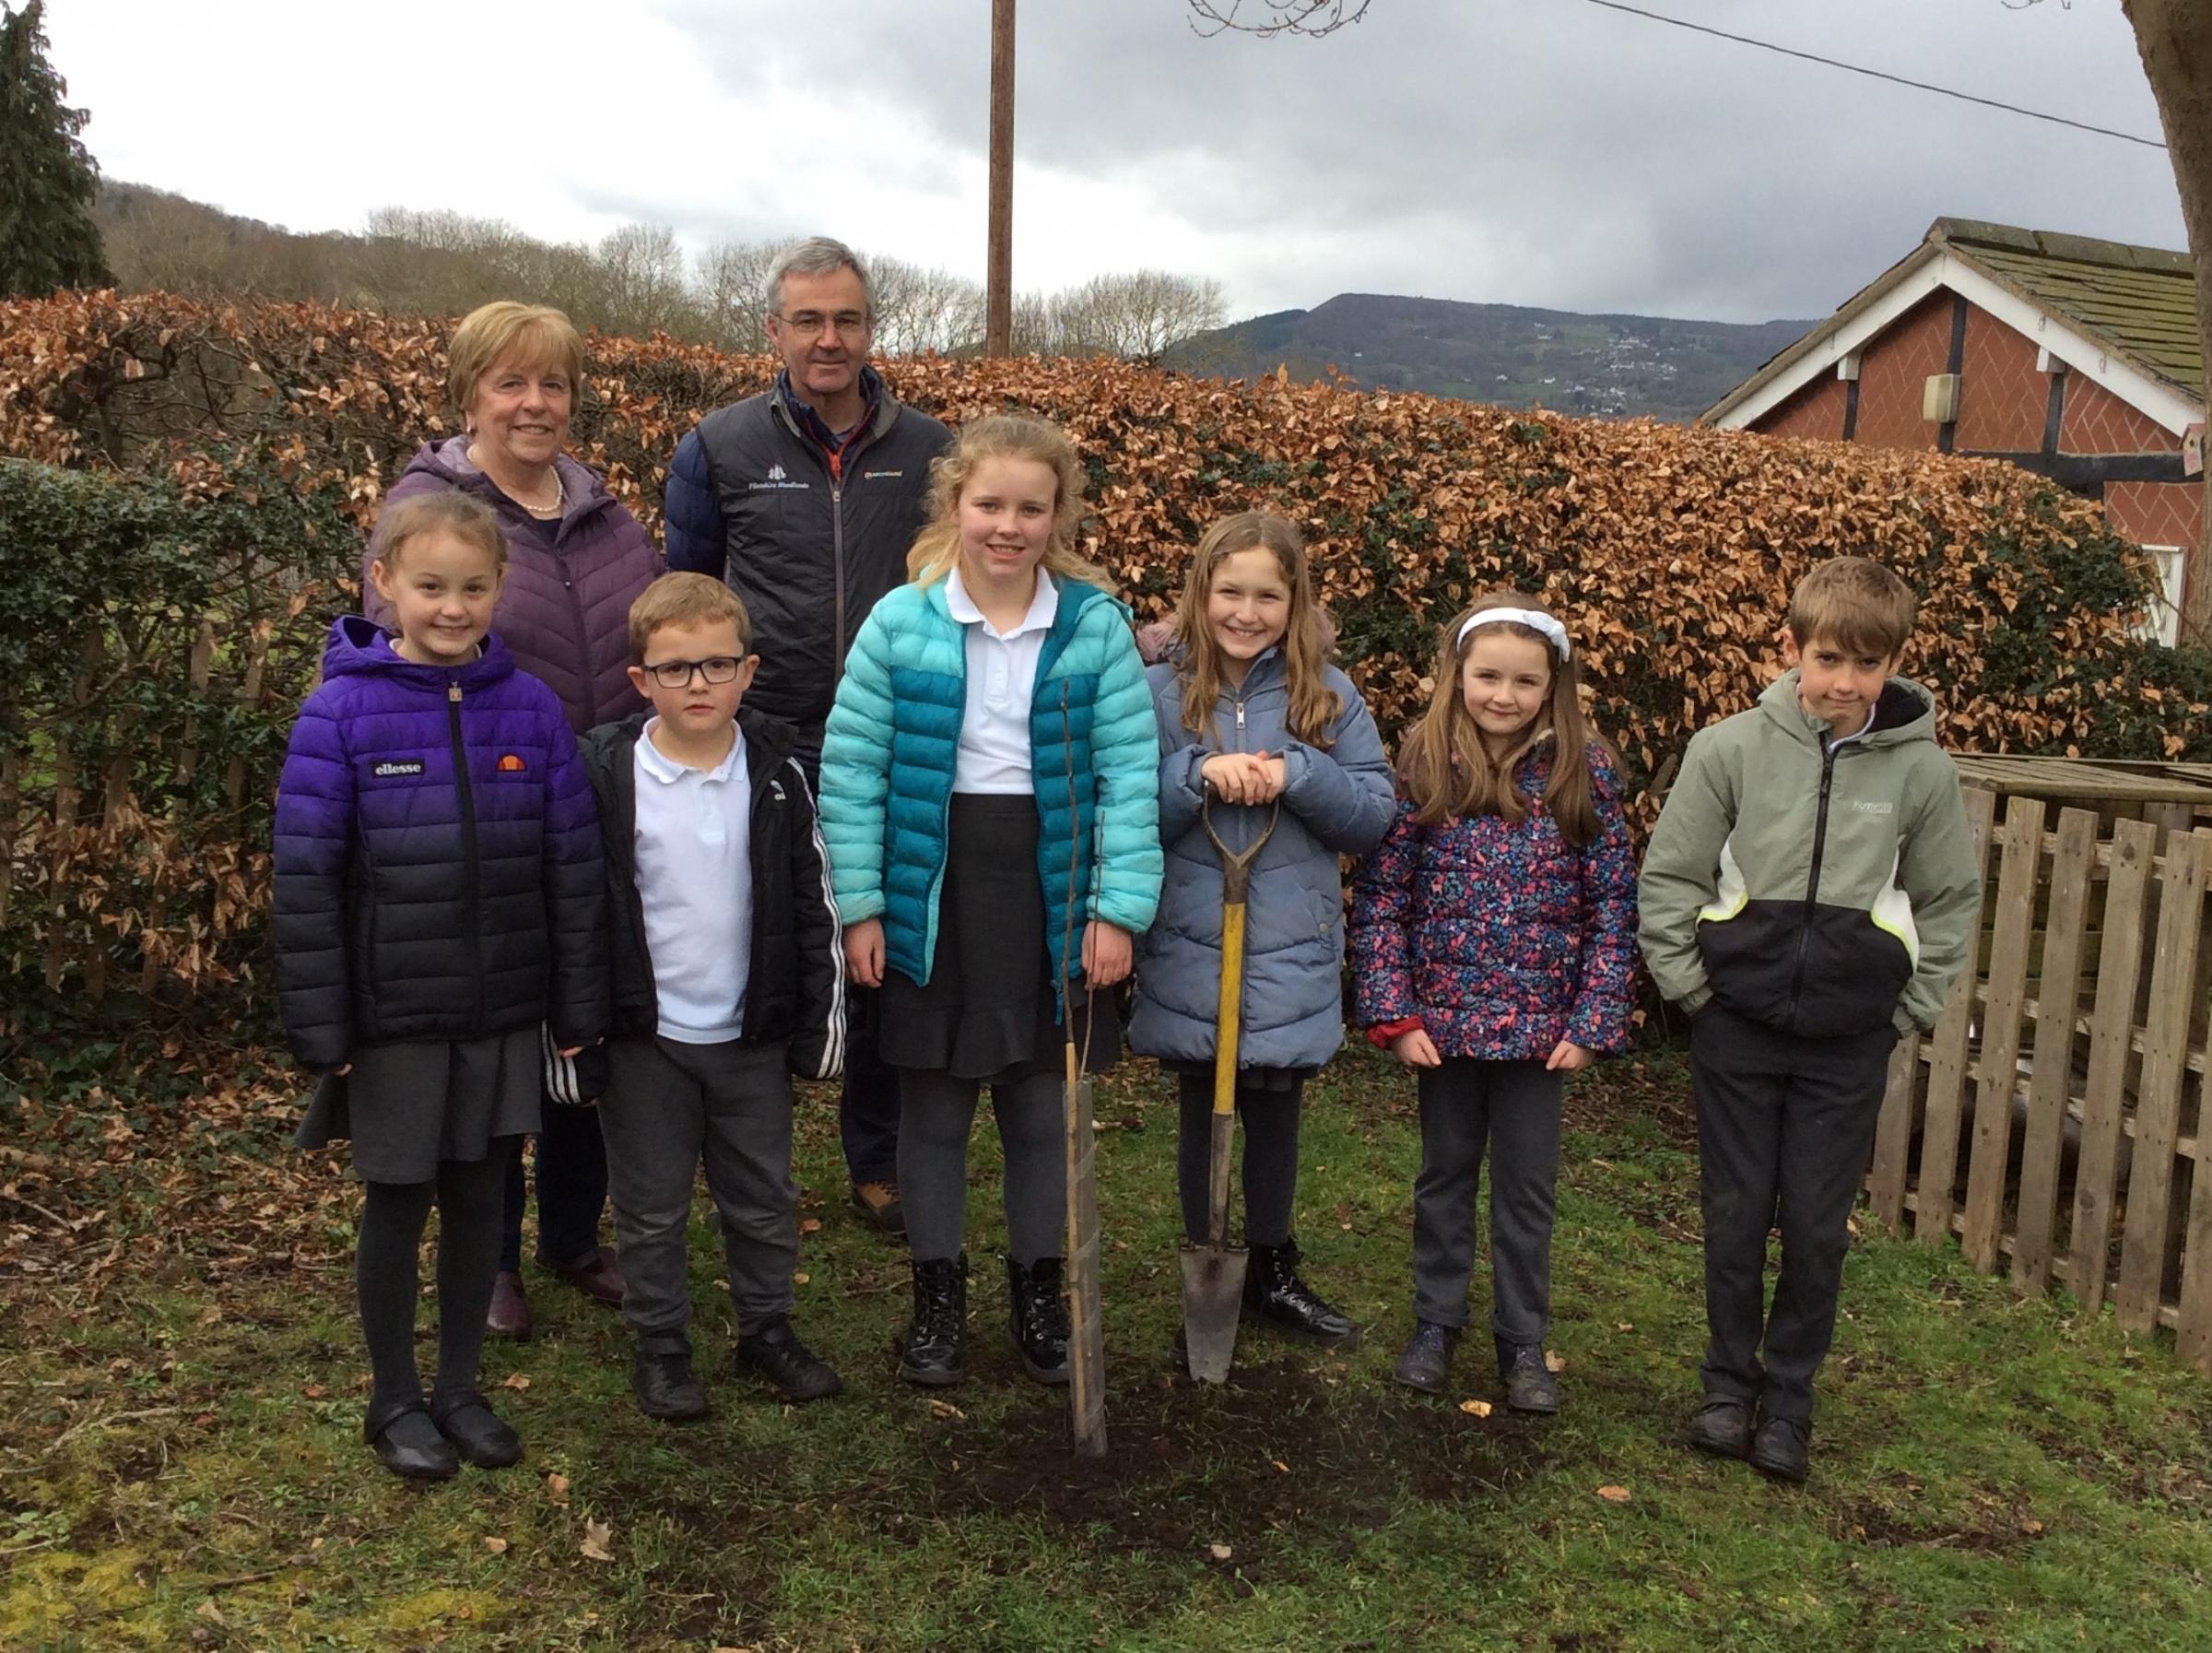 Tree planting for the Queens Green Canopy, from Ysgol Pentre pupils.